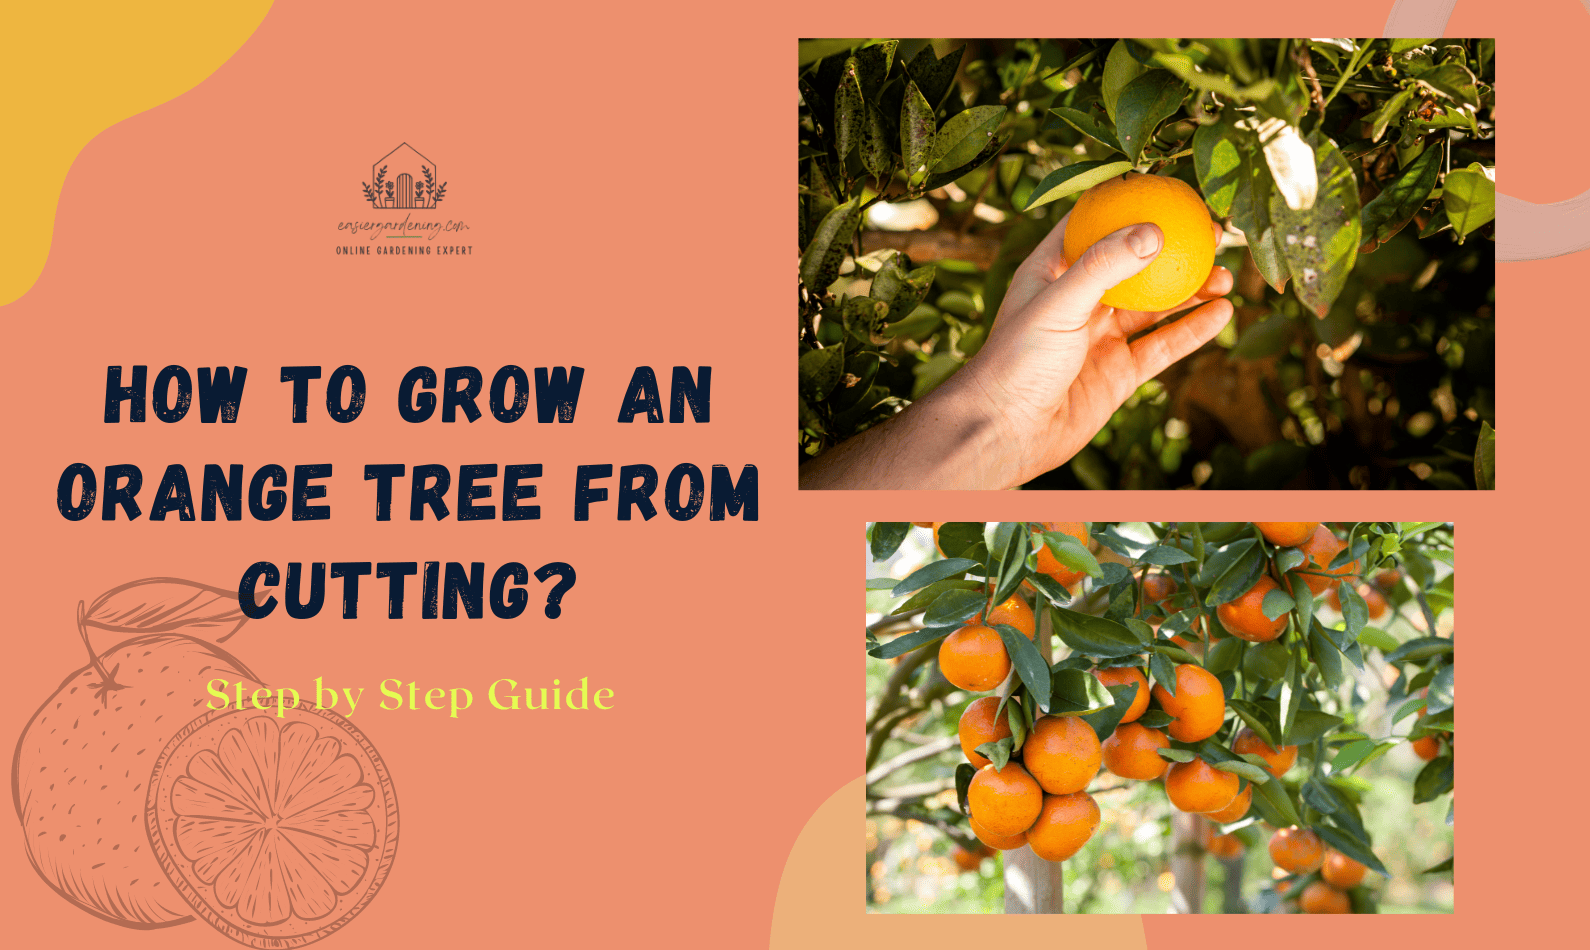 How to Grow an Orange Tree from Cutting?